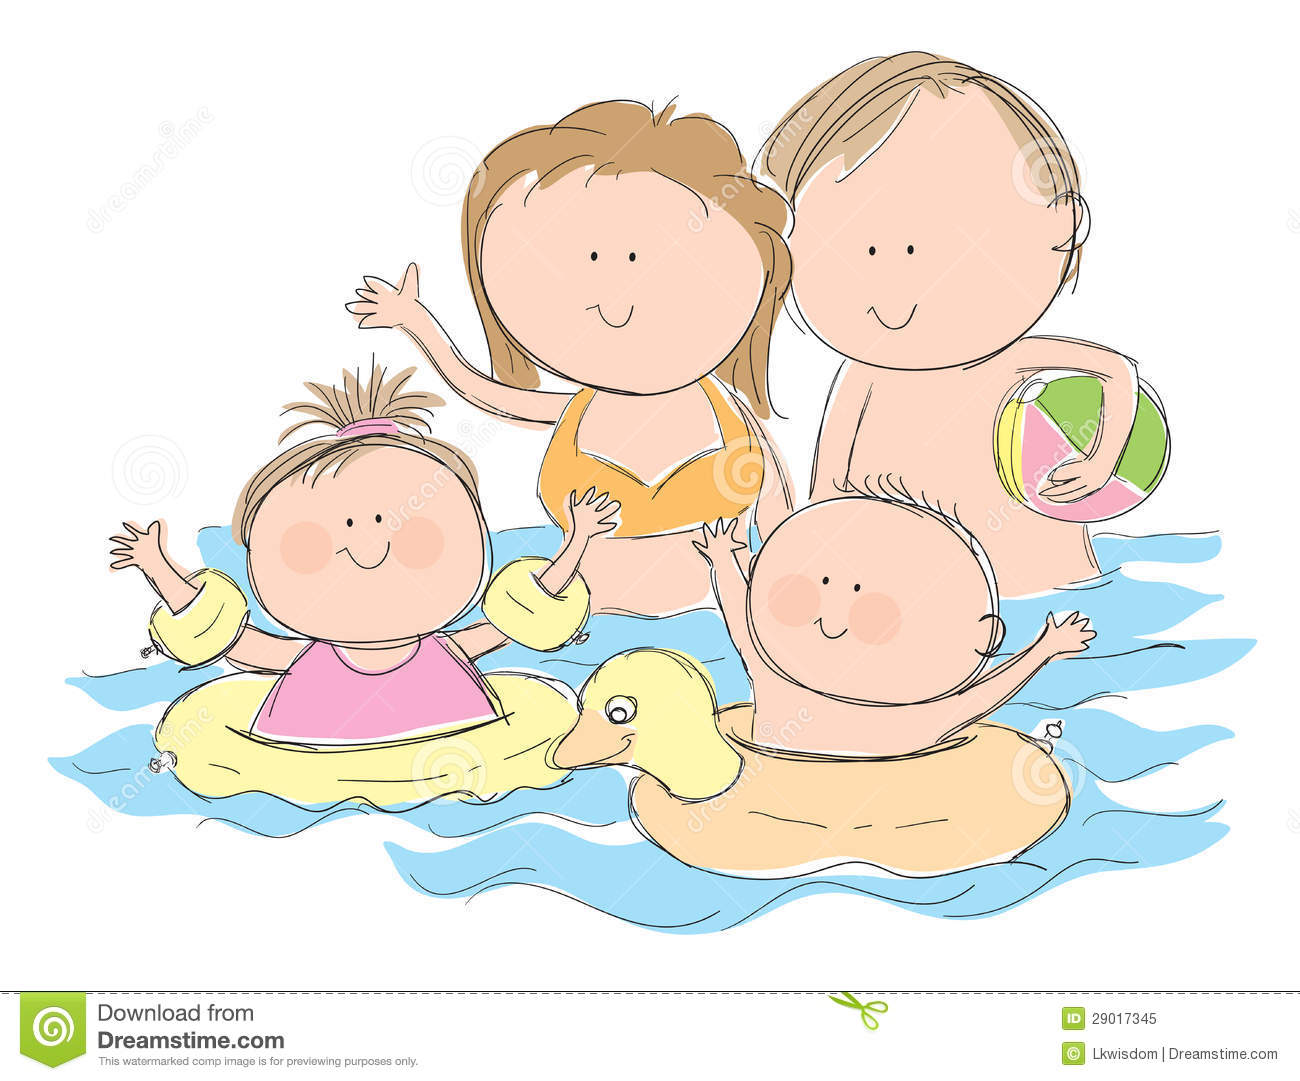 Hand Drawn Picture Of A Family In A Swimming Pool Illustrated In A